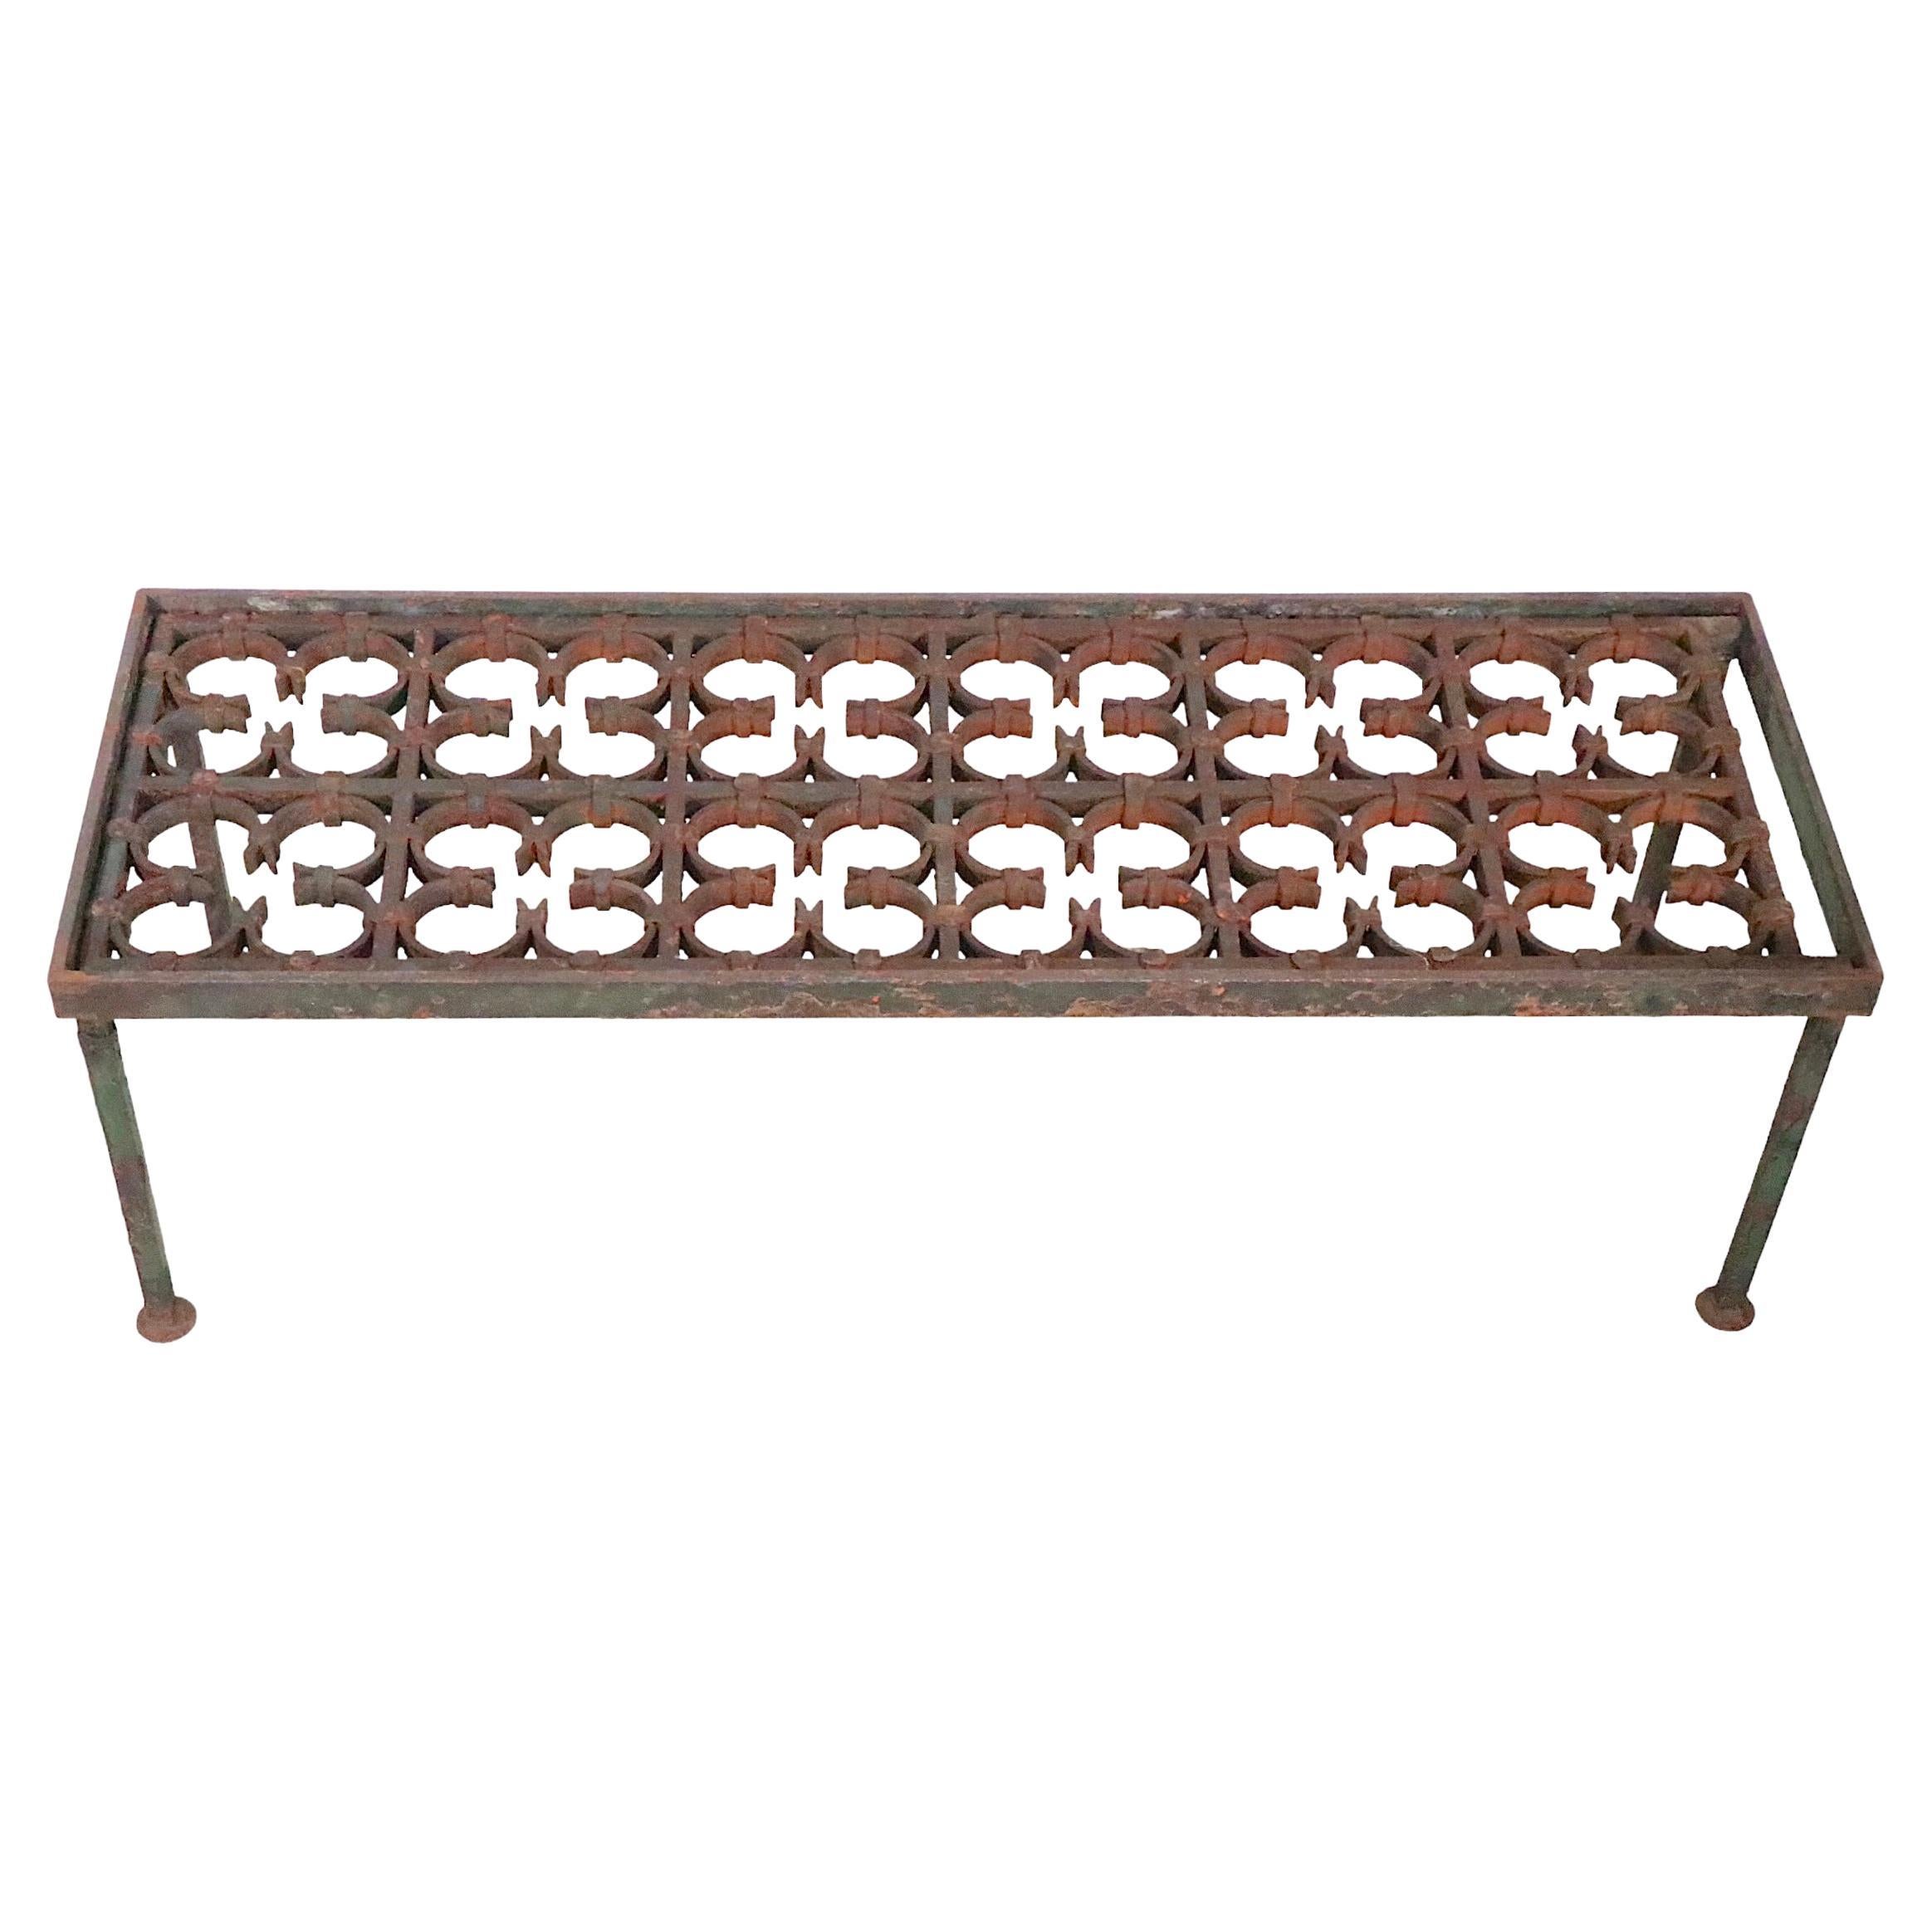 Iron and Glass Coffee Table created from a decorative  architectural iron panel